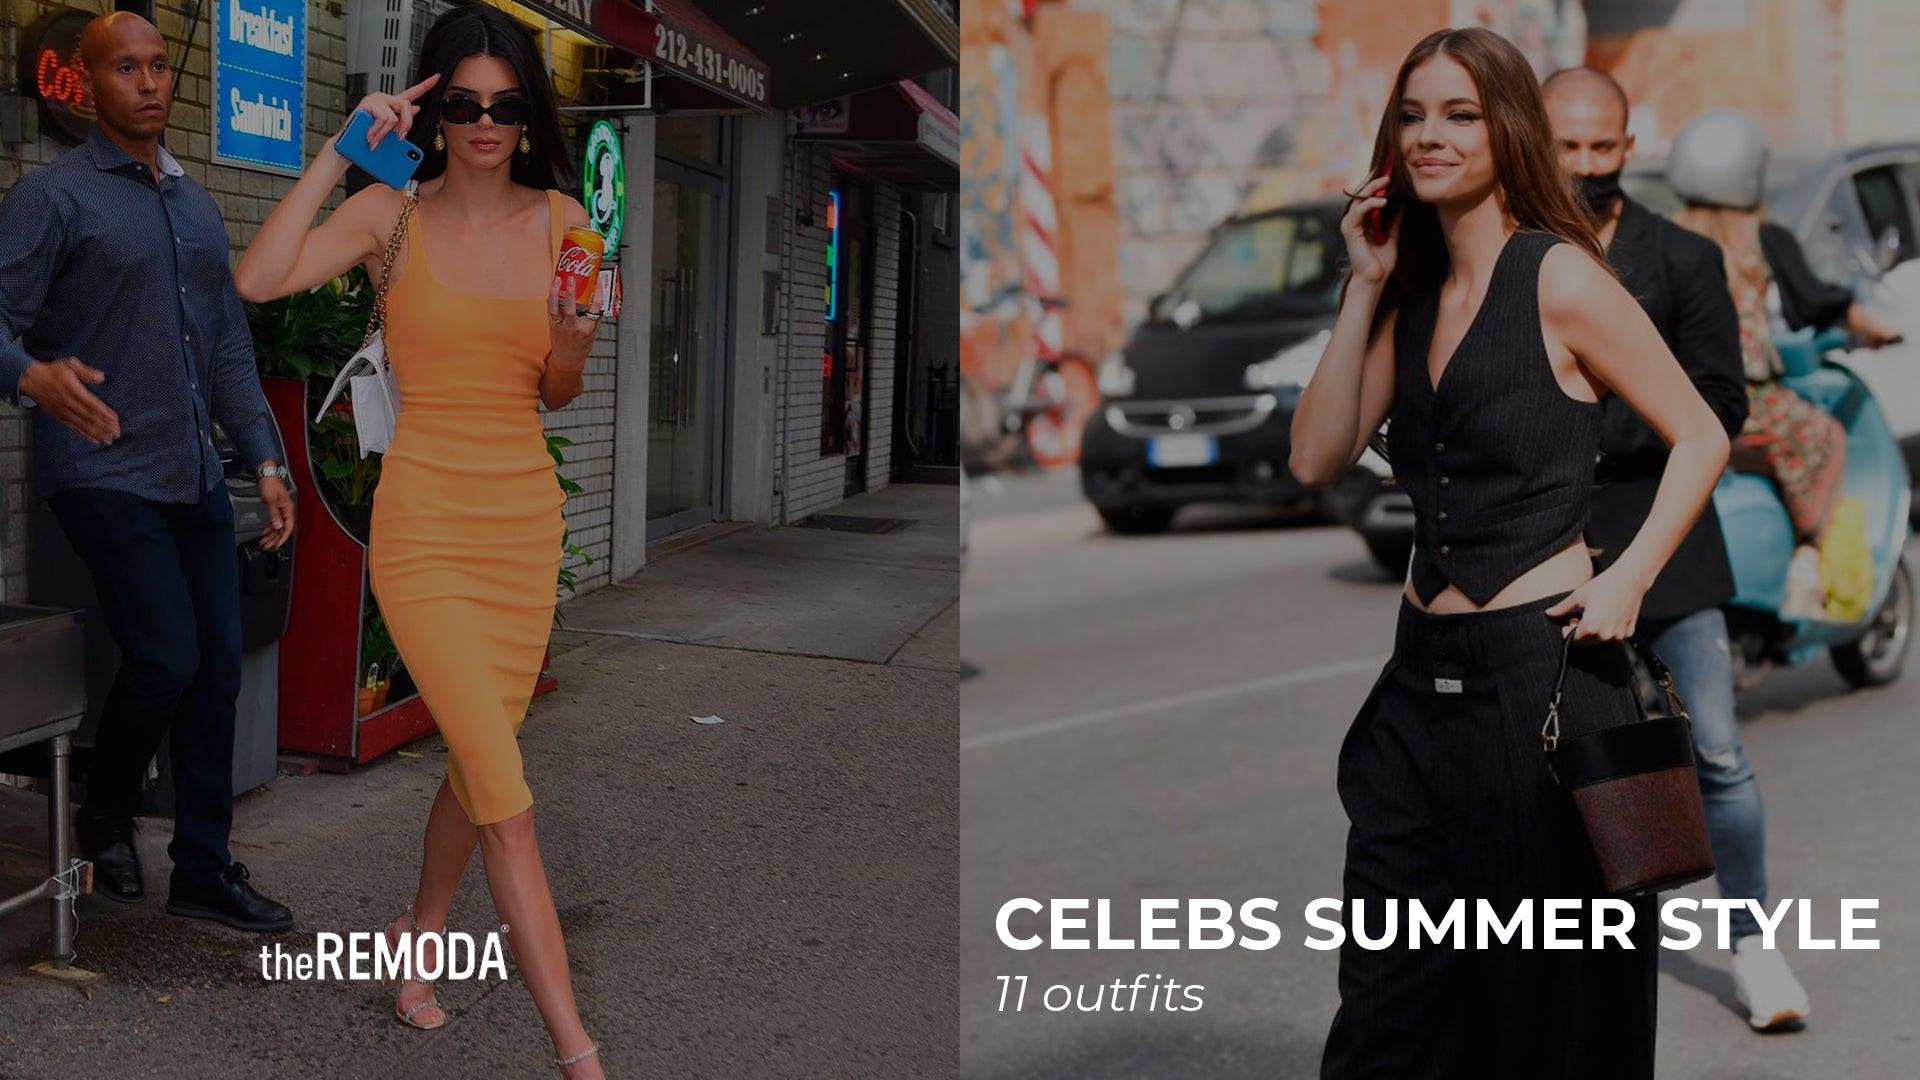 Celebs summer style - theREMODA